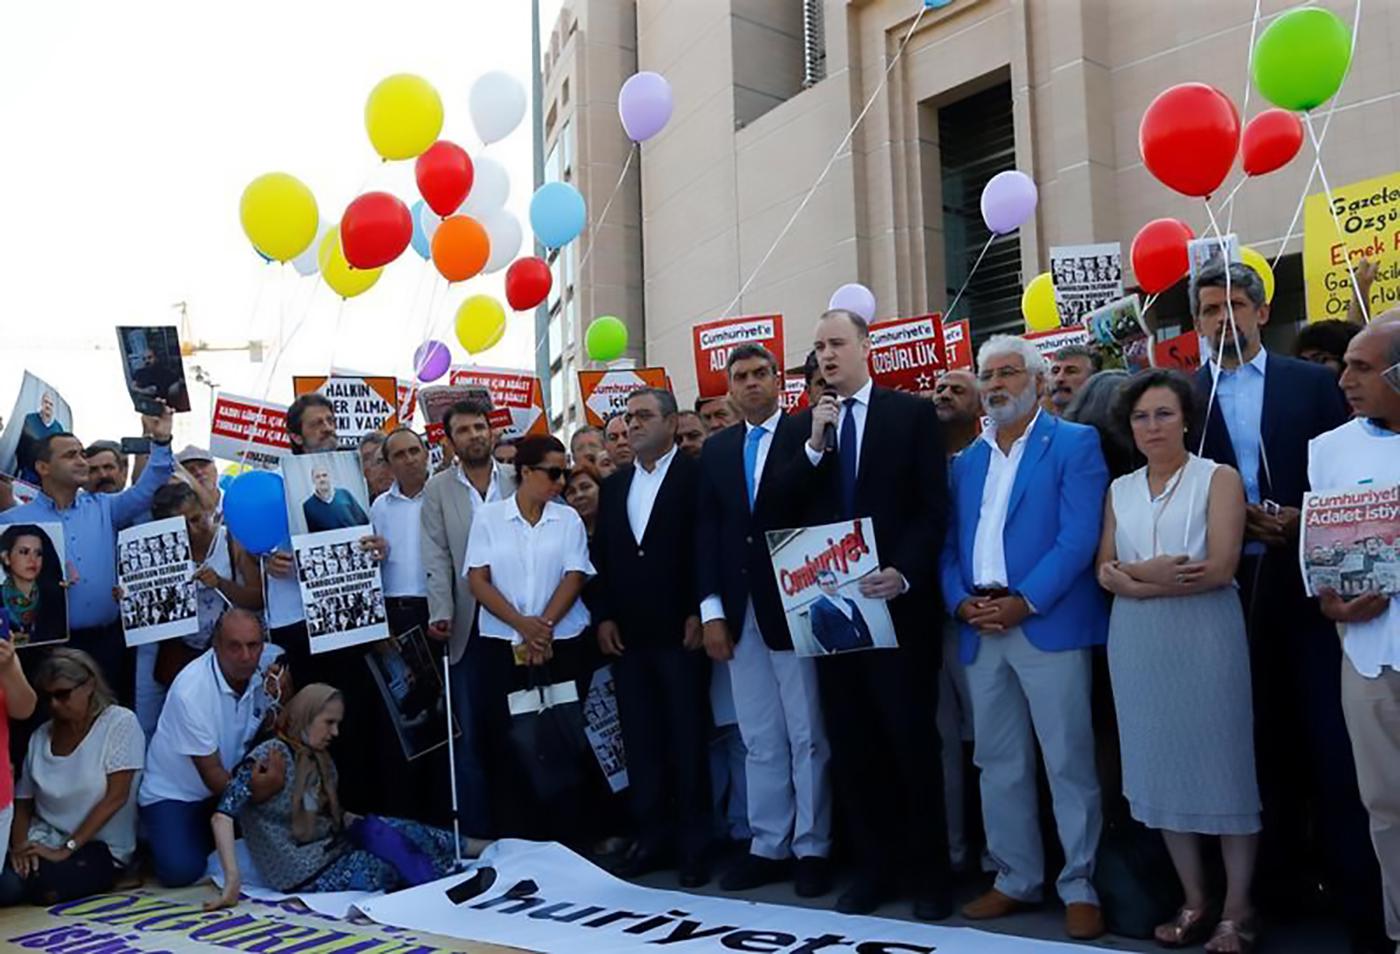 A demonstration outside a courthouse in Istanbul, Turkey in solidarity with the staff of the opposition newspaper Cumhuriyet on trial over alleged support to terrorist groups, July 24, 2017.